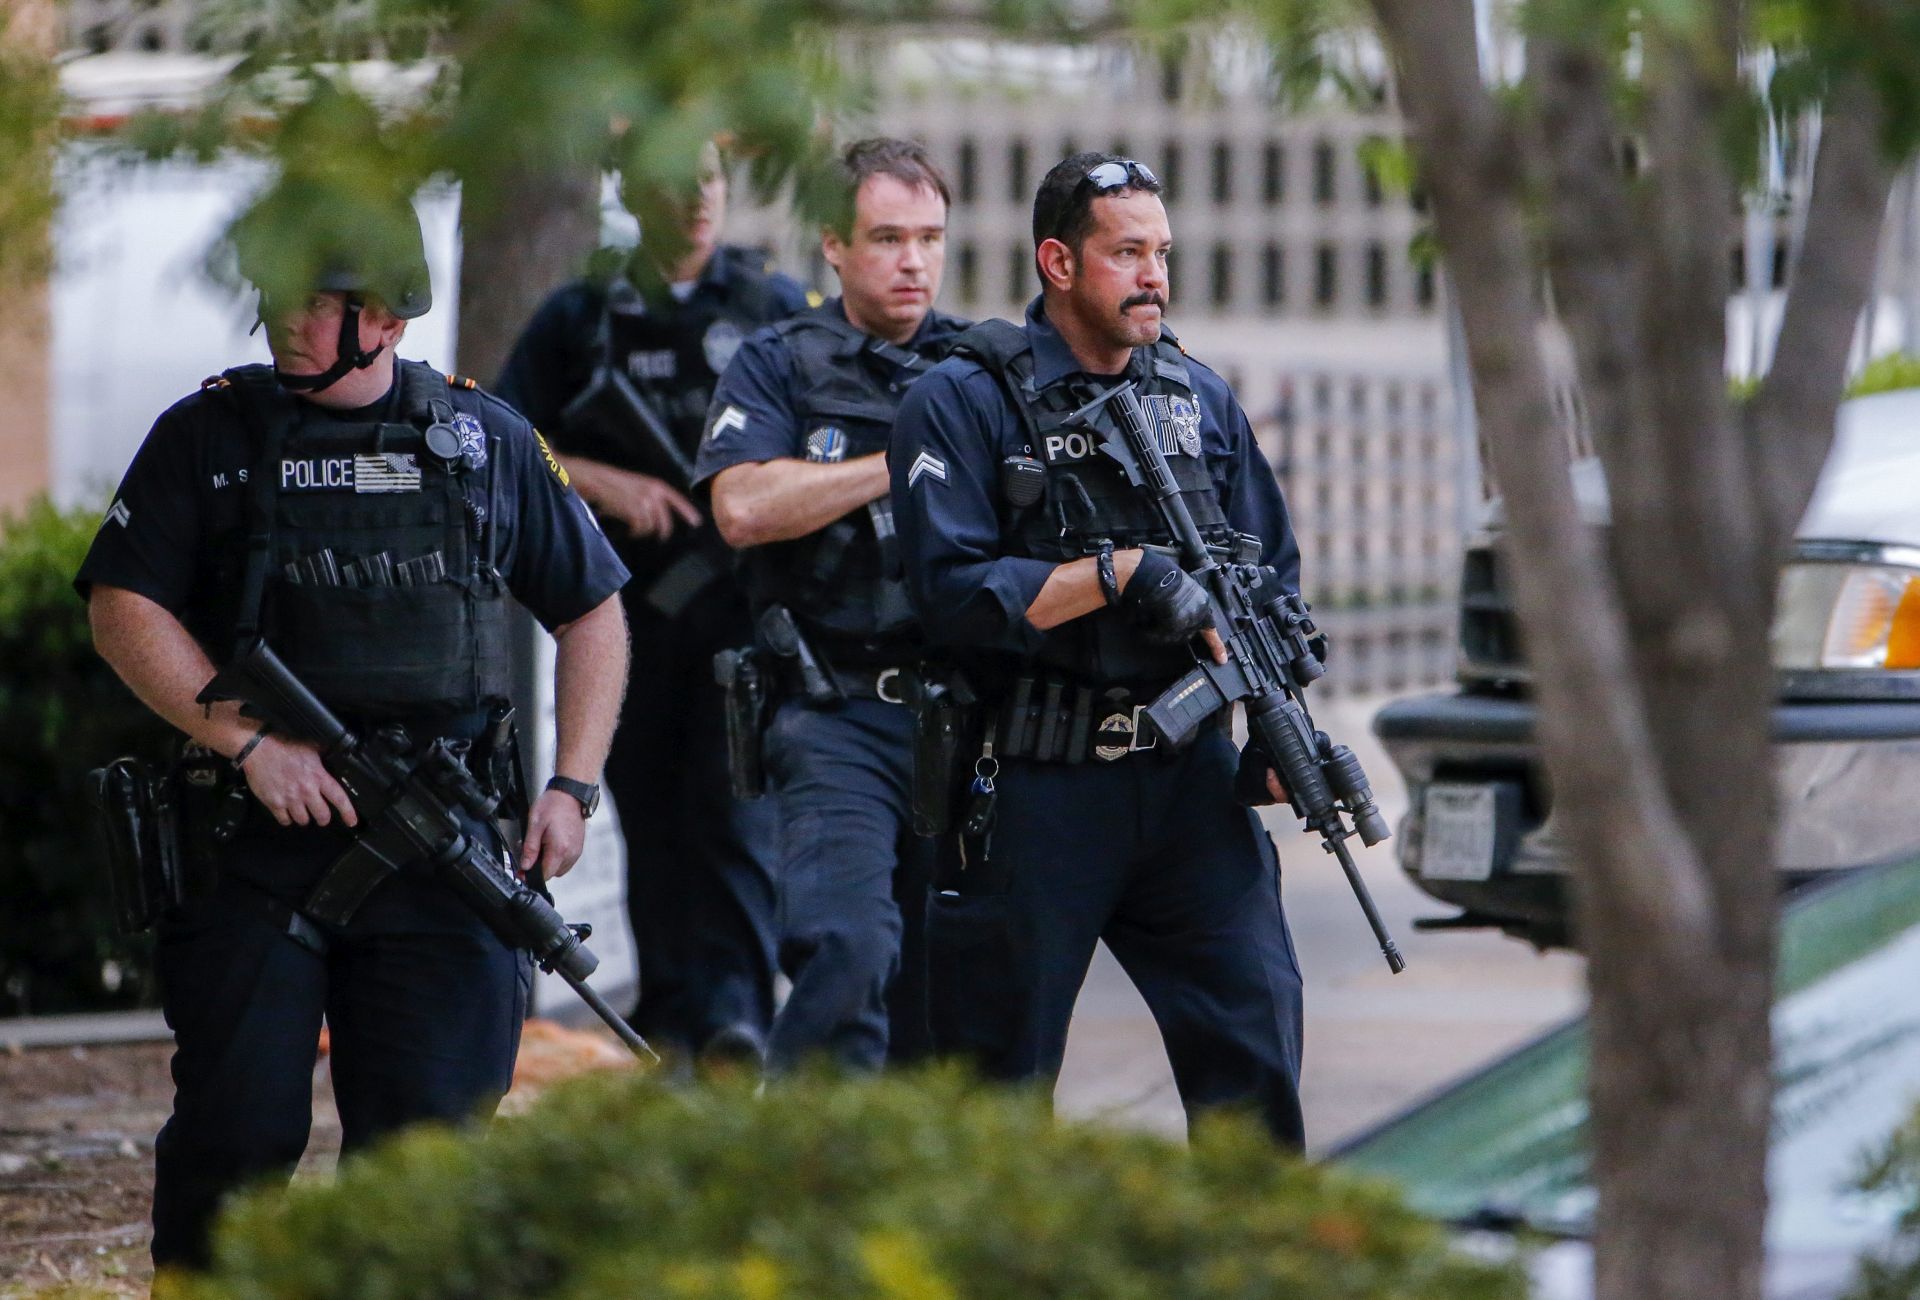 epa05417870 Heavily-armed Dallas Police Department officers investigate a 'credible threat' at the department's headquarters in Dallas, Texas, USA, 09 July 2016. Five officers died and seven were injured after an ambush assault by a gunman during a protest rally in Dallas on 07 July.  EPA/ERIK S. LESSER